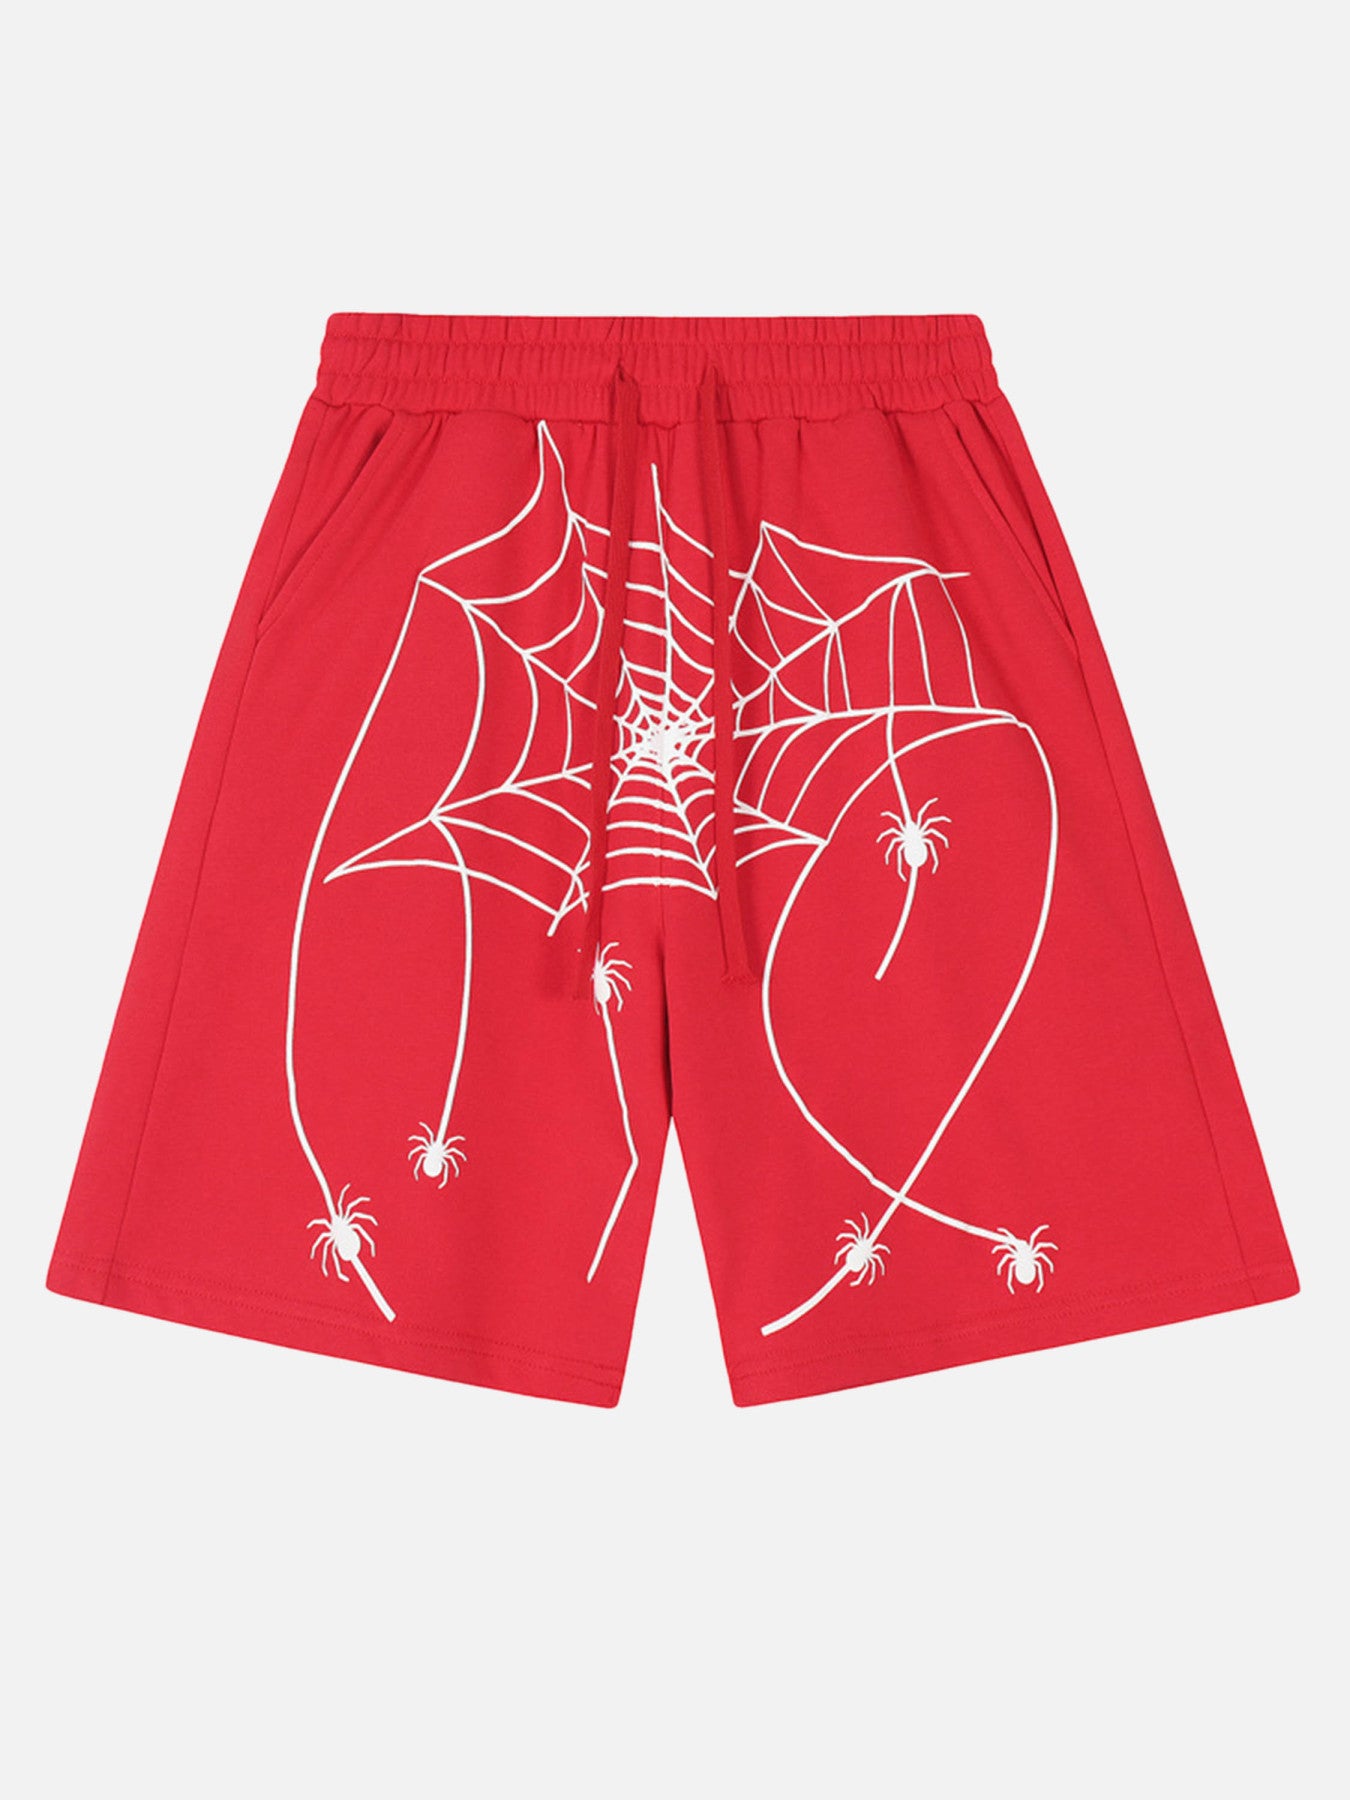 The Supermade American Vintage Spider Print Shorts